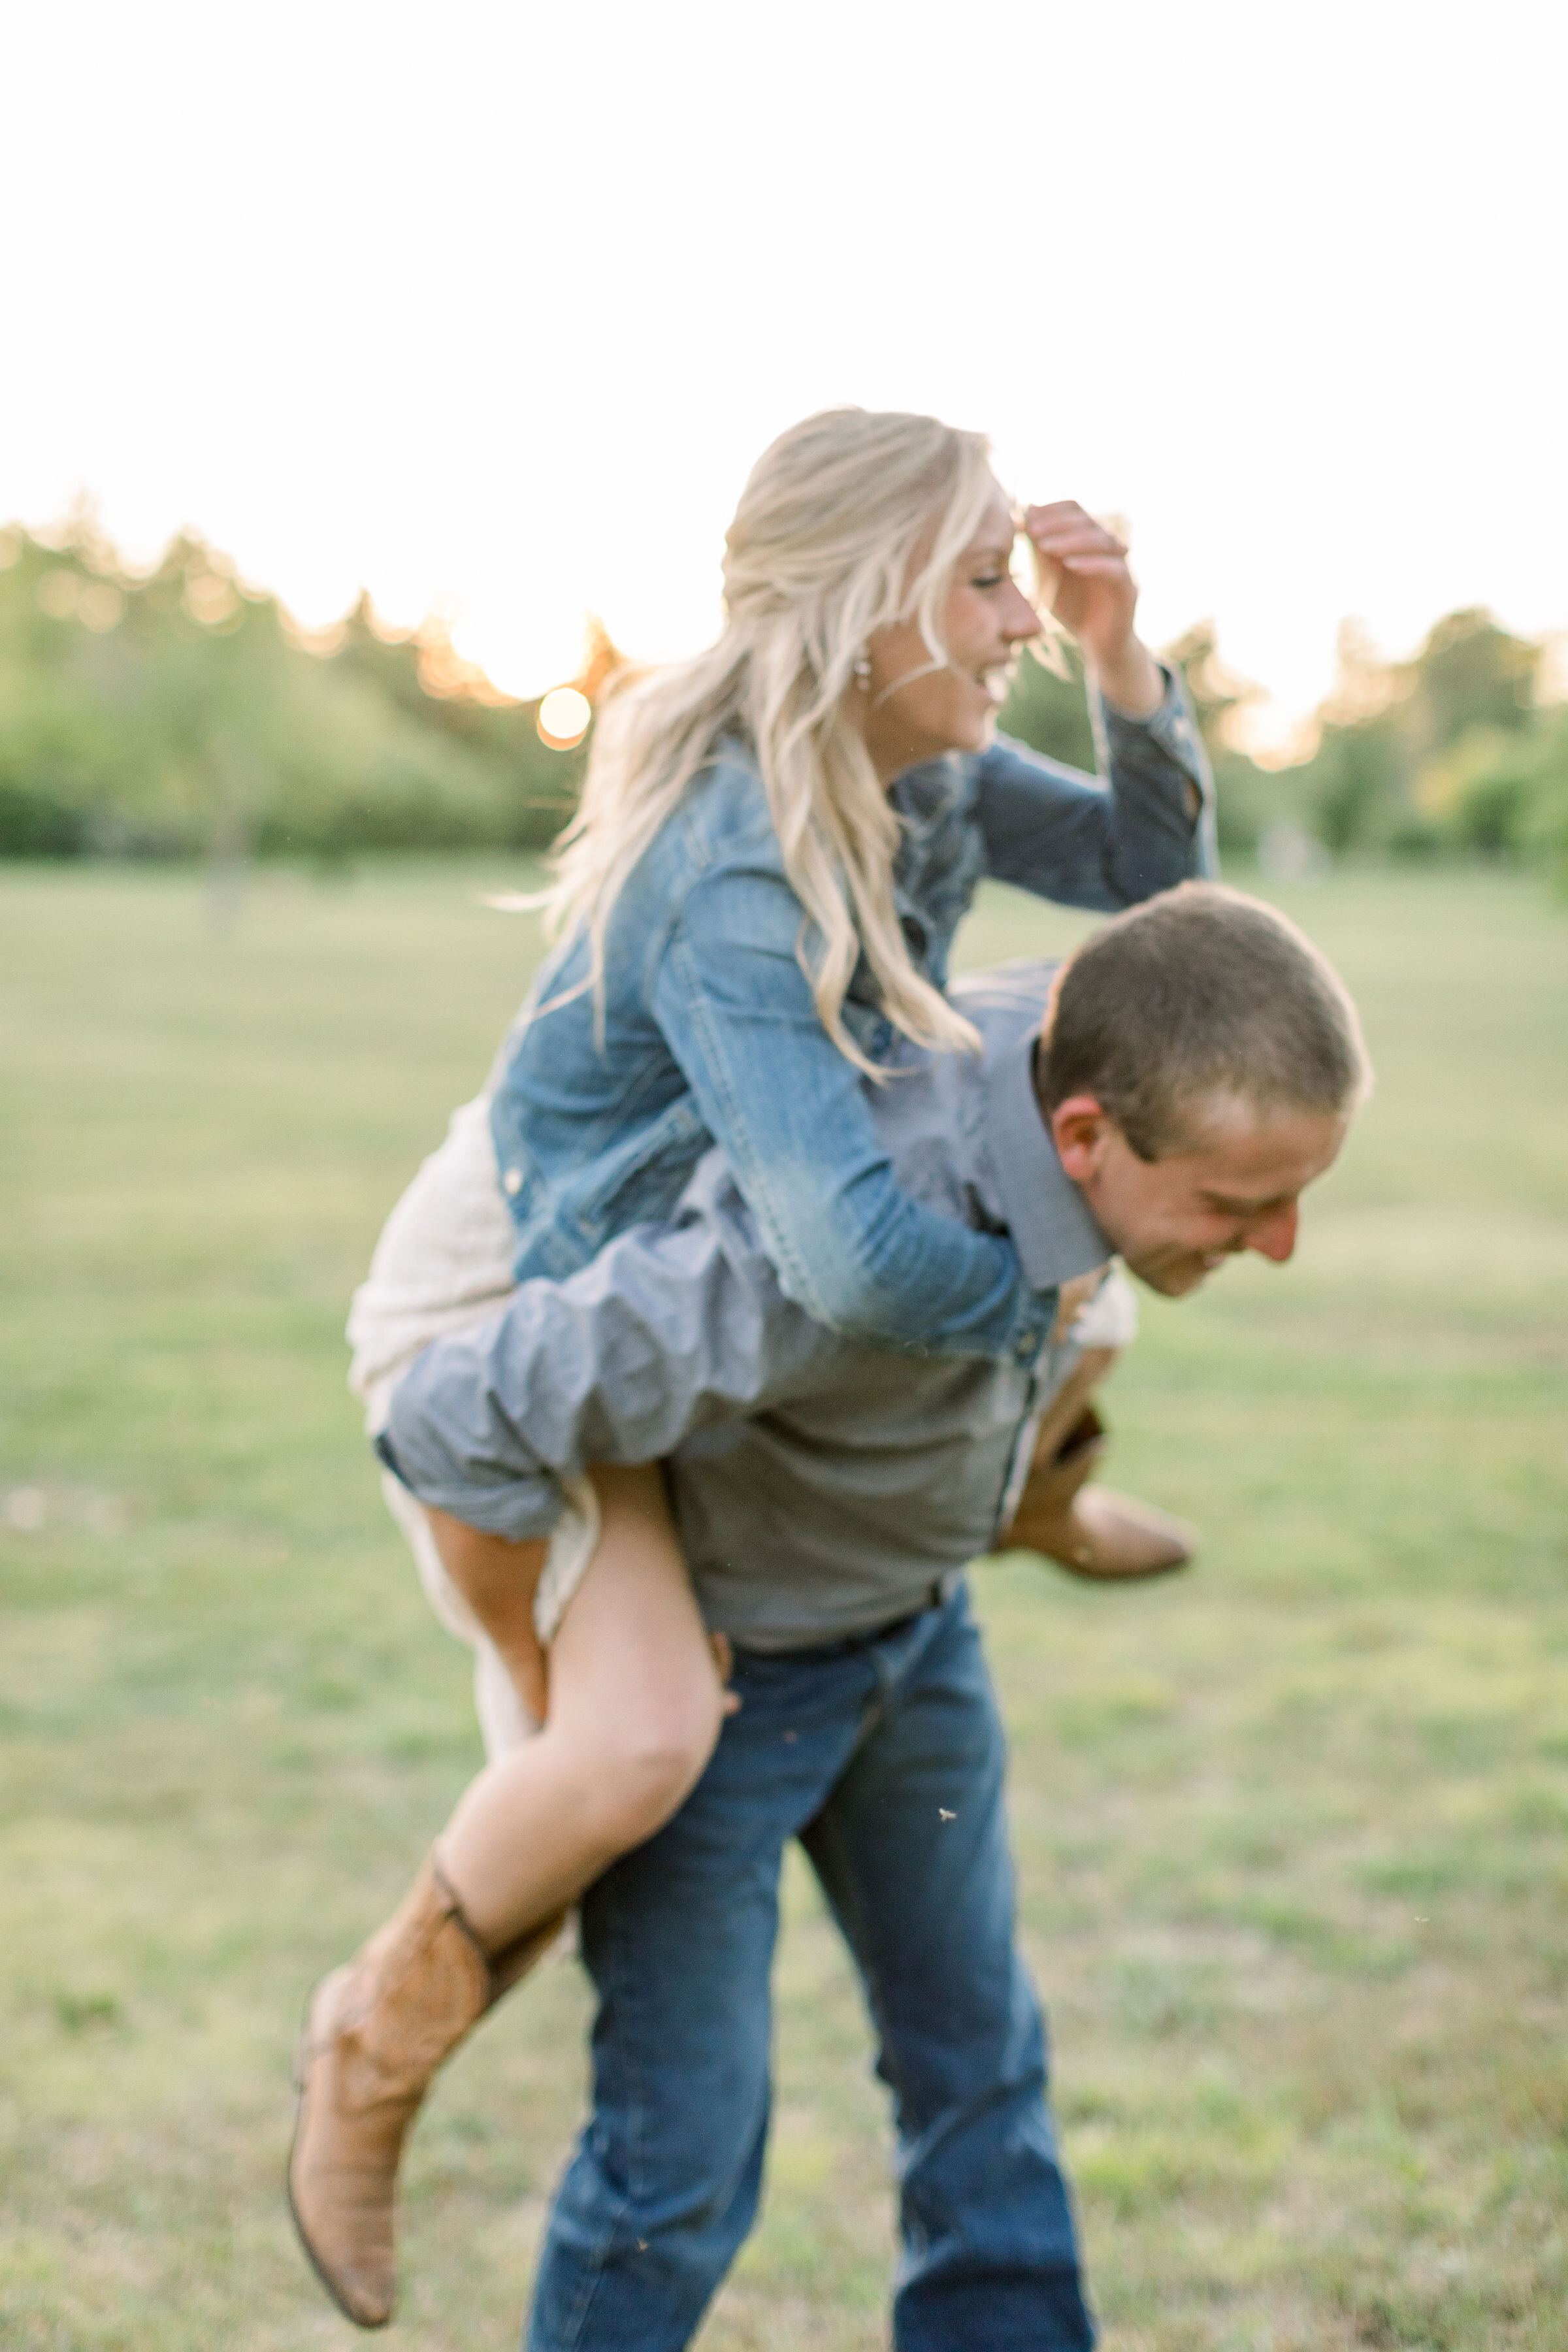  During this playful engagement session in Ottawa, Canada, Chelsea Mason Photography captures this engaged couple giving piggy back rides. laughing piggy back ride women's denim jacket and cowgirl boots #ChelseaMasonPhotography #OttawaOntarioCouplesP